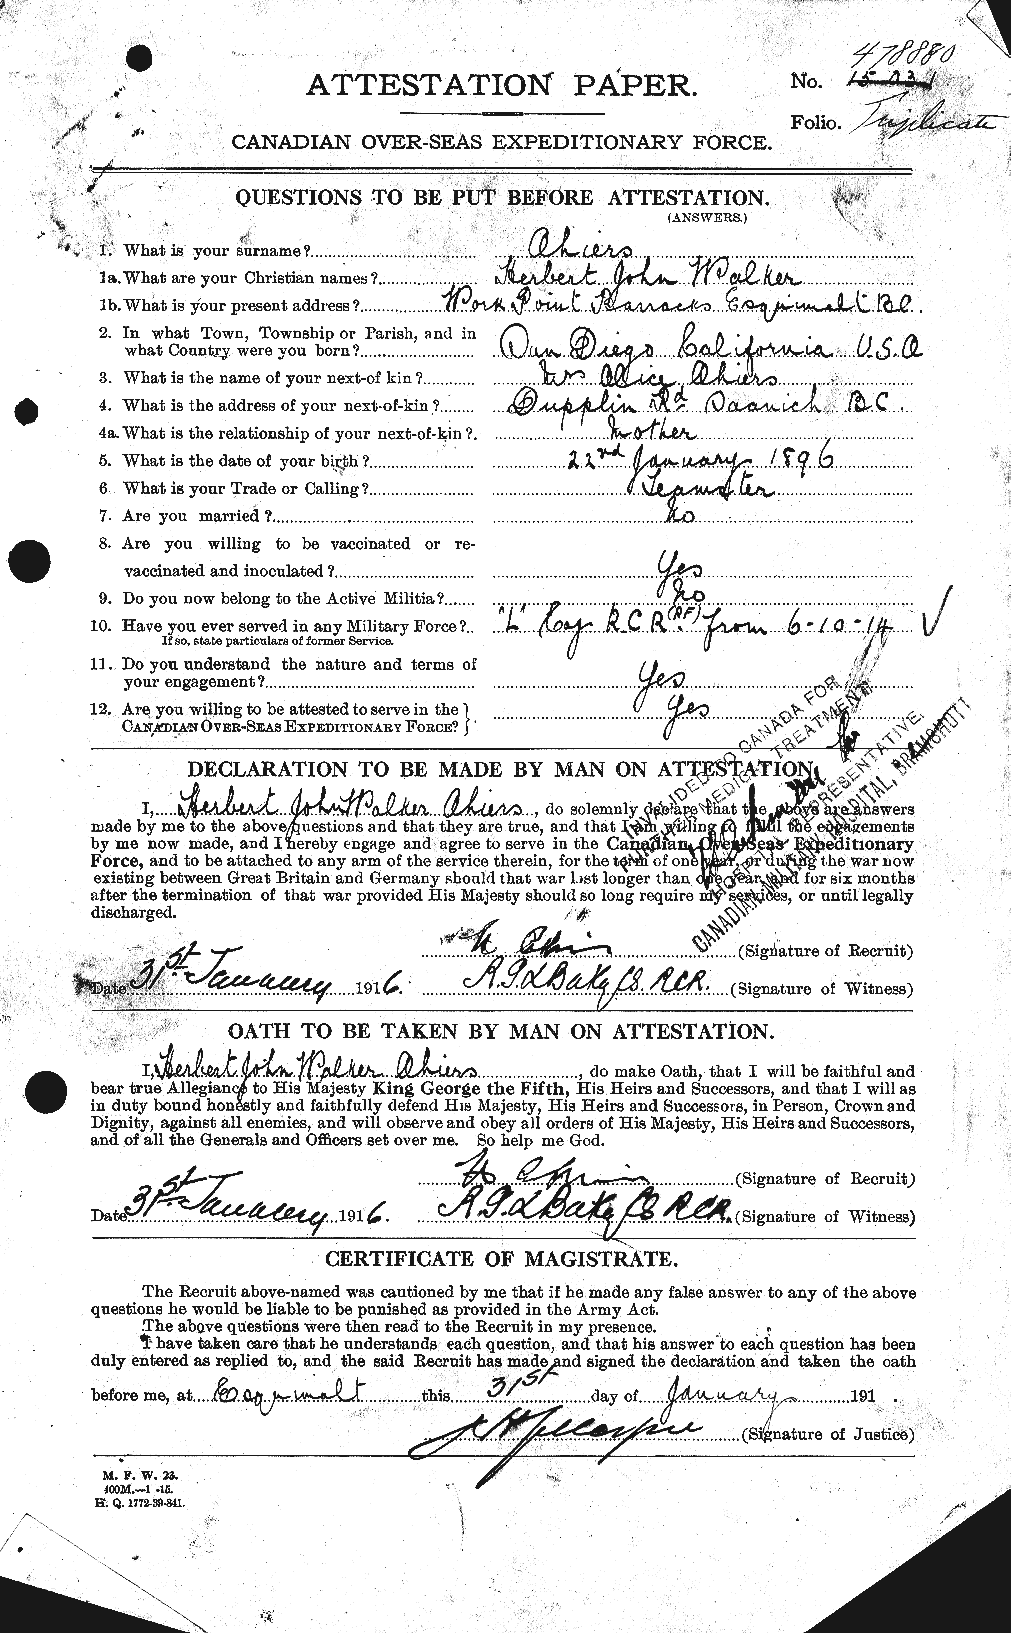 Personnel Records of the First World War - CEF 203896a